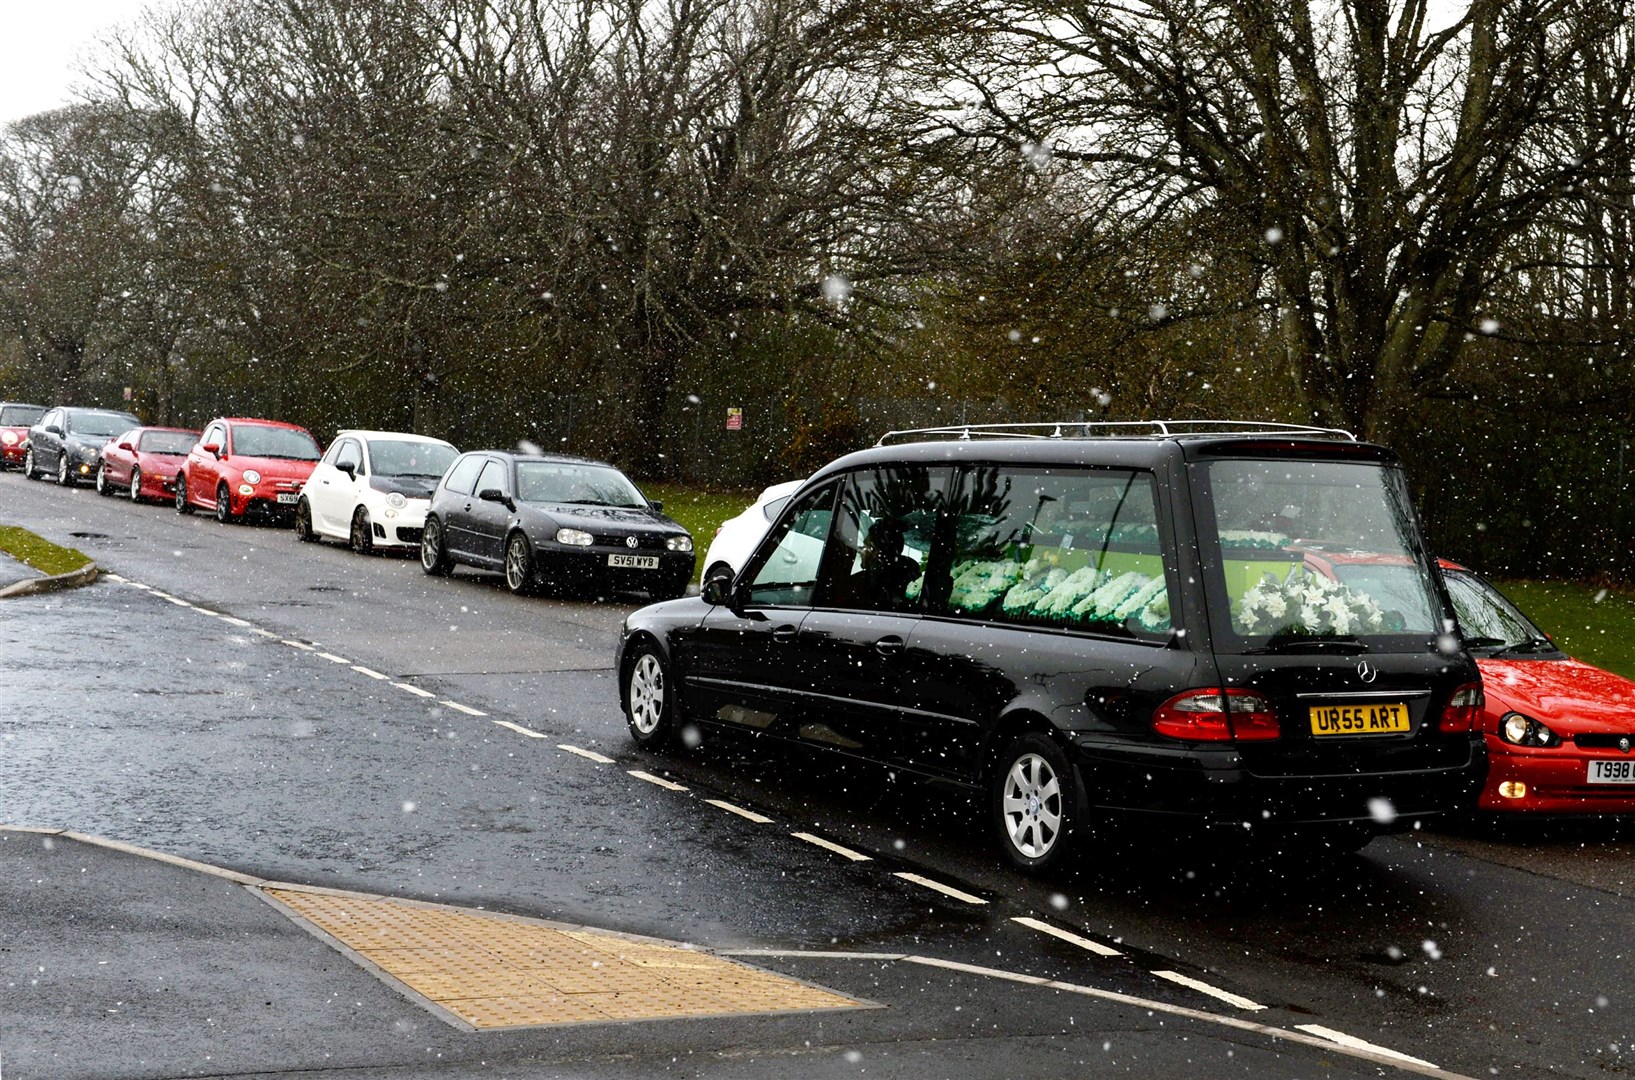 Craig Melville's funeral cortege was joined by fellow car enthusiasts as a final mark of respect.